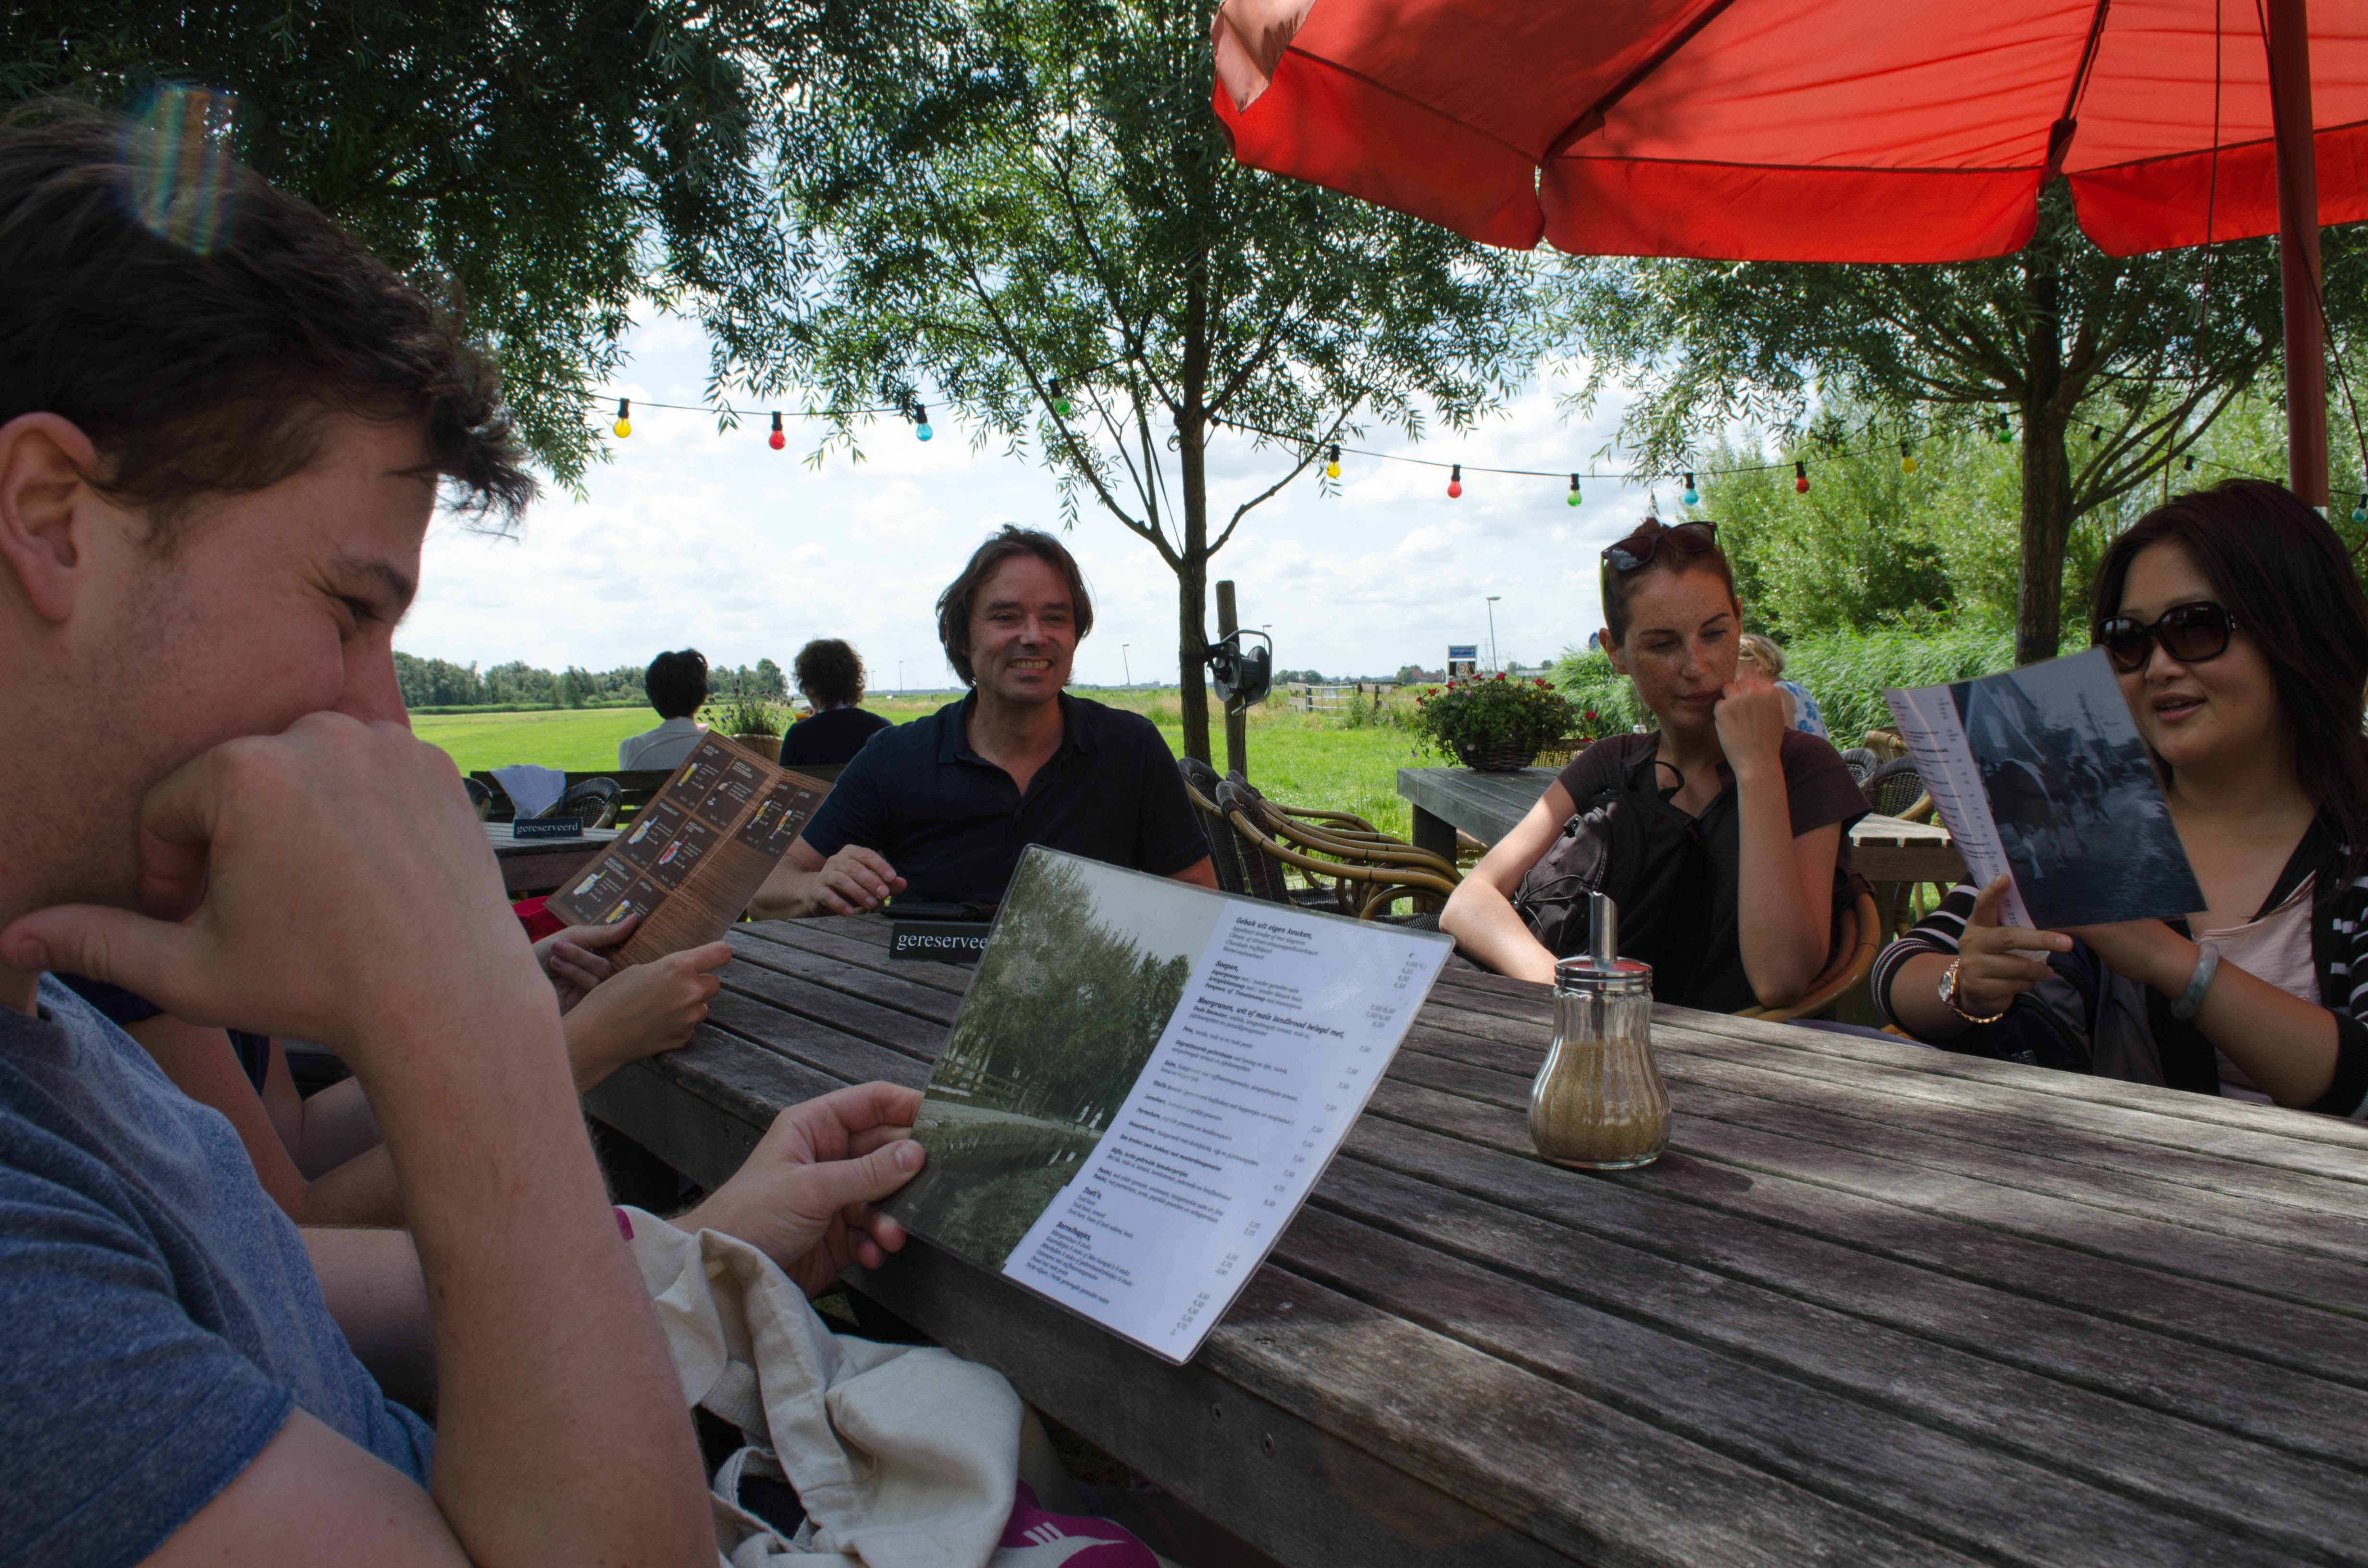 A group of my friends from Dutch class decide what to order from the menu at a small café outside of Holysloot, north of Amsterdam in Holland.